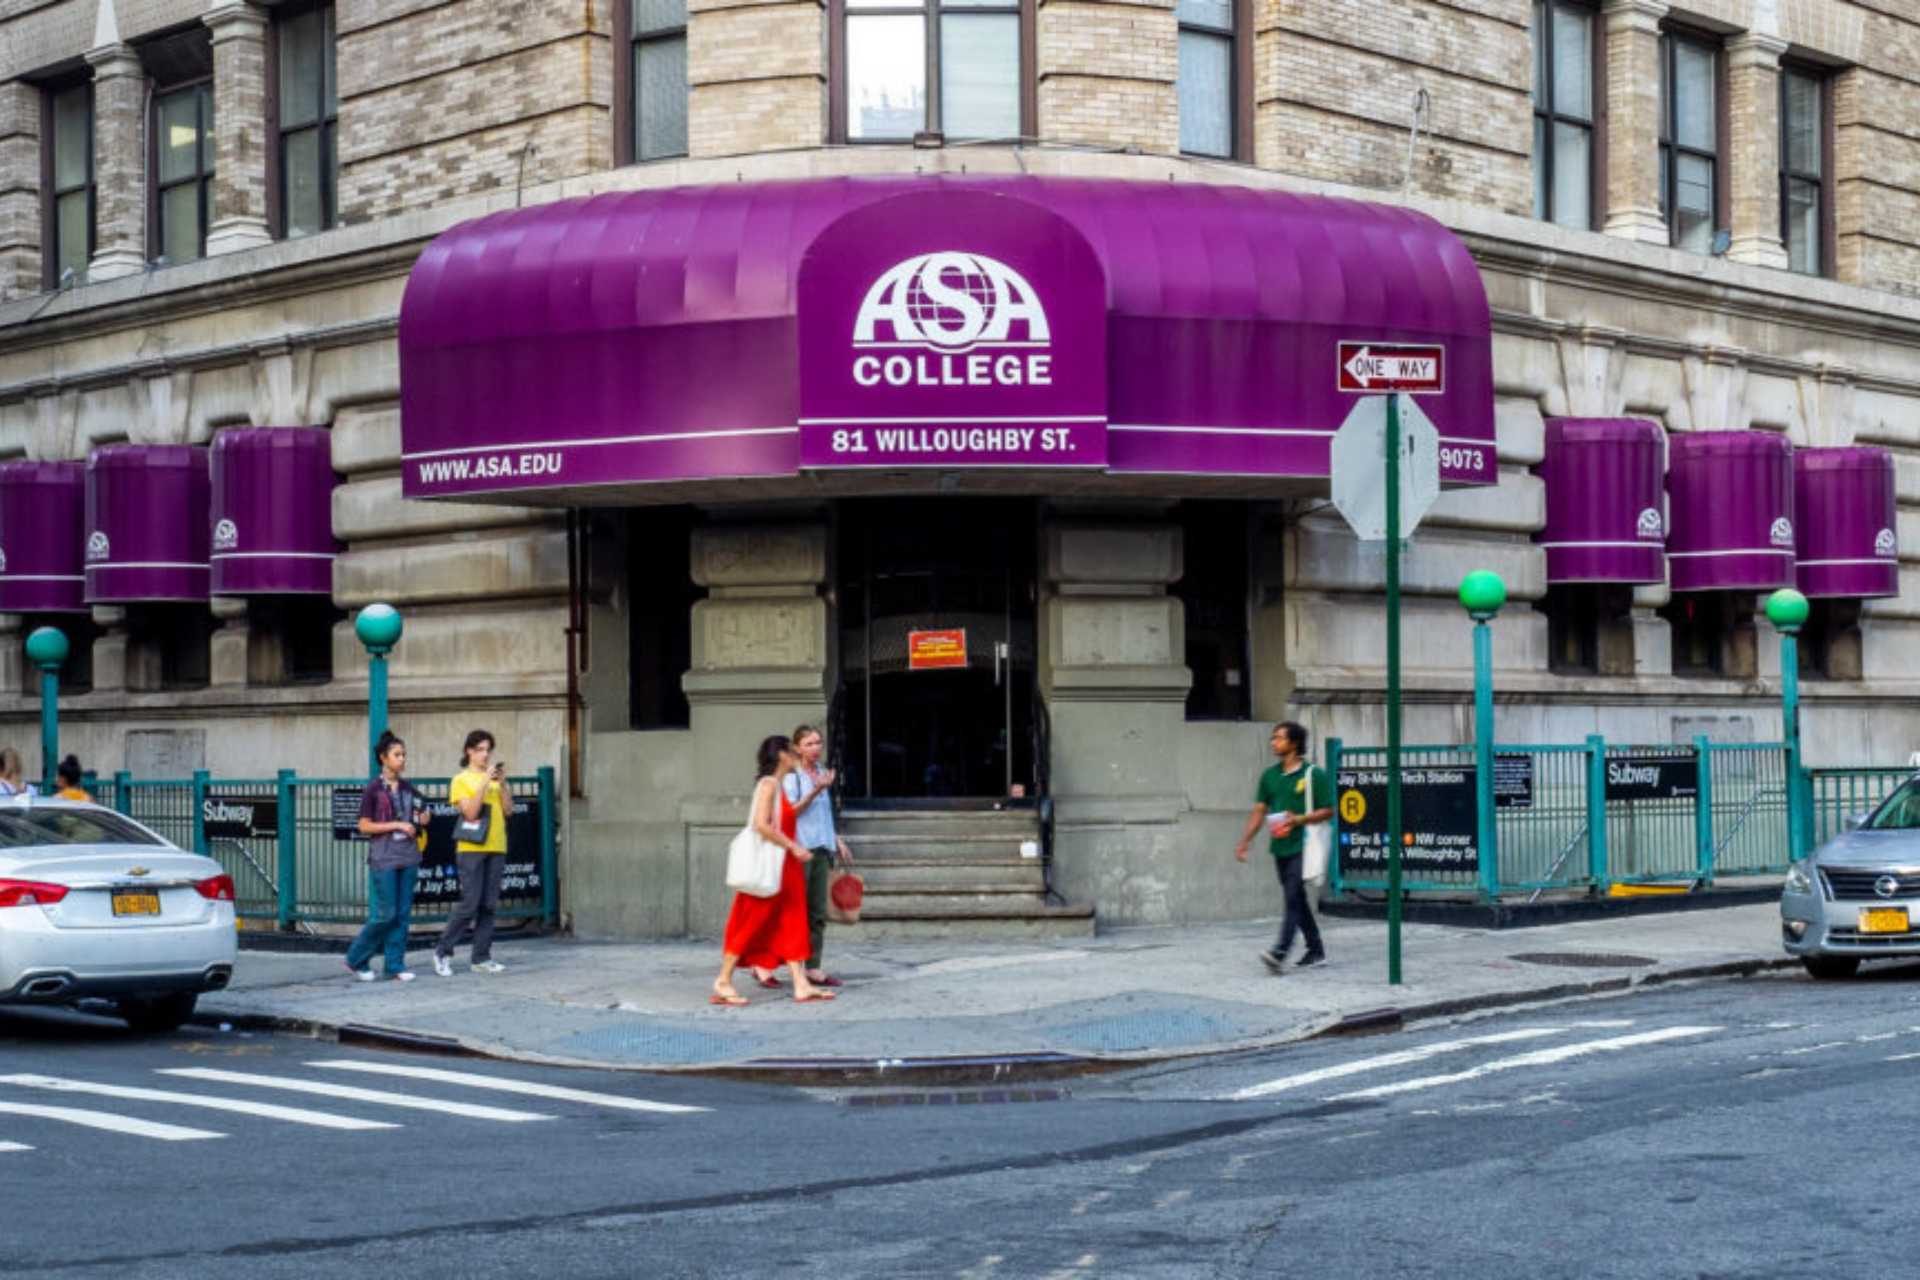 A street view of the awning for ASA College